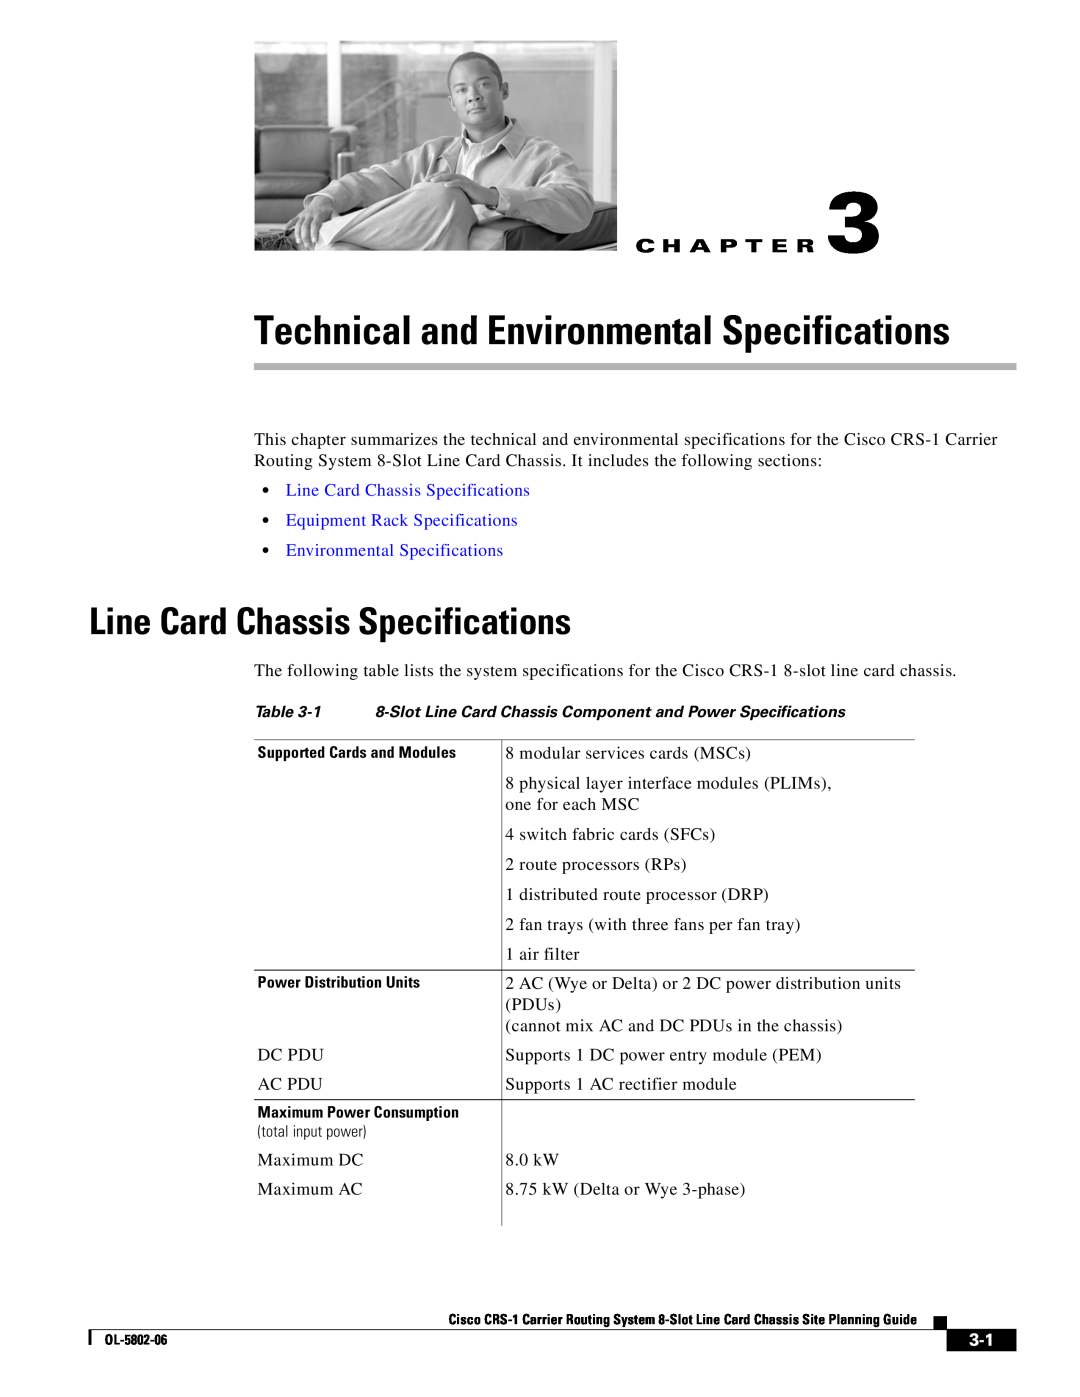 Cisco Systems CRS-1 manual Line Card Chassis Specifications Equipment Rack Specifications, Environmental Specifications 